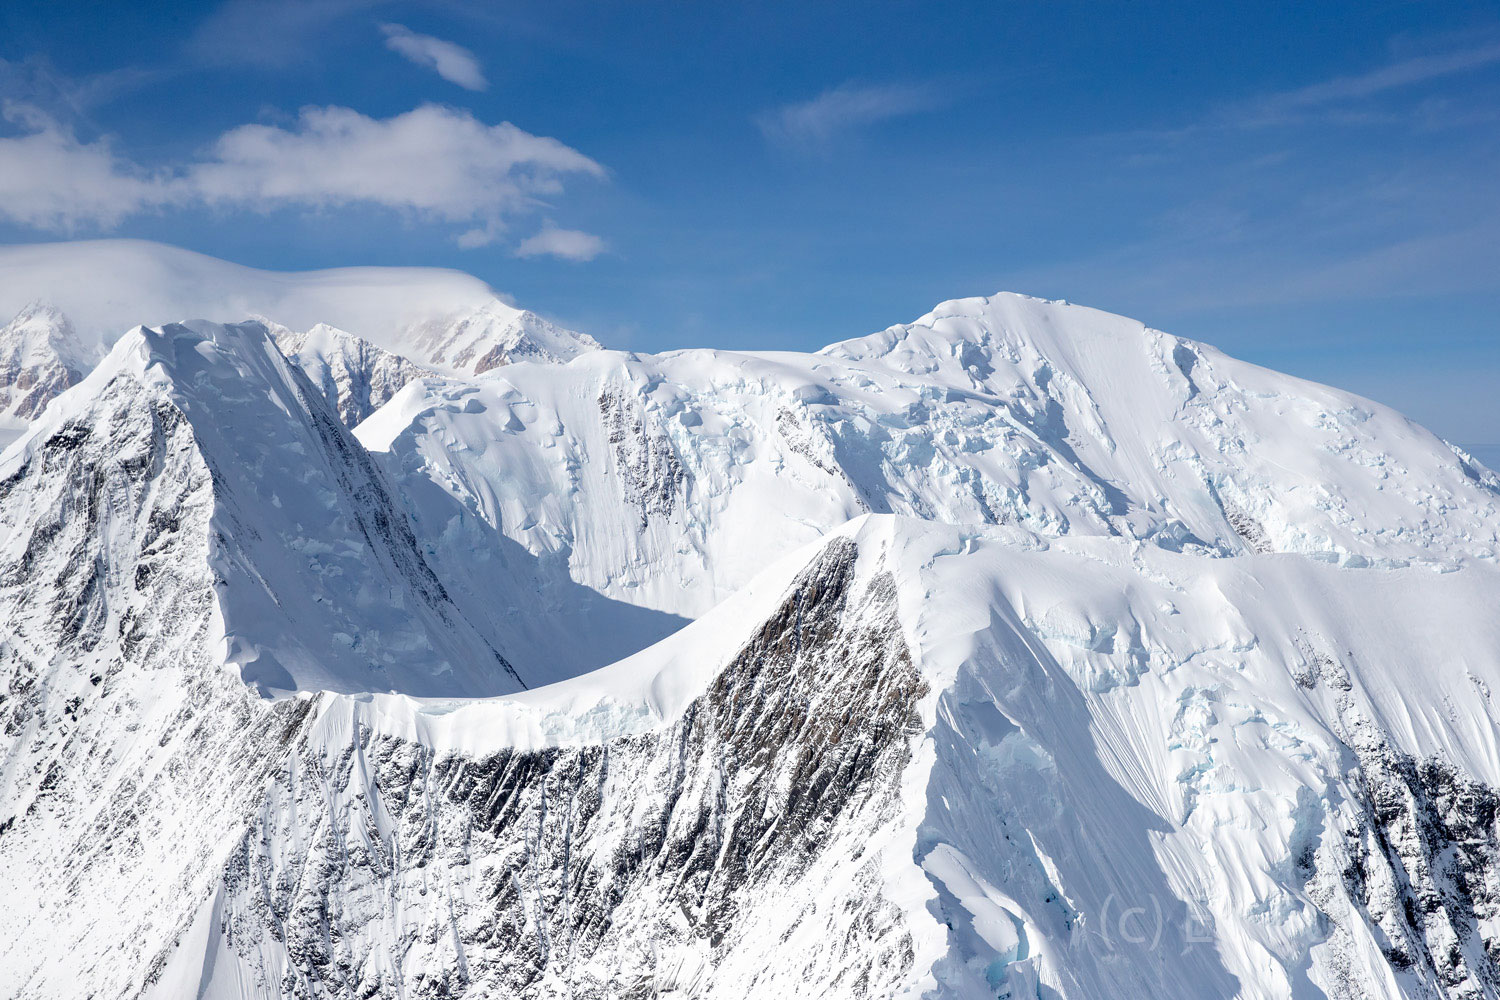 Almost to the Top - a view of the volcanic origins of Denali